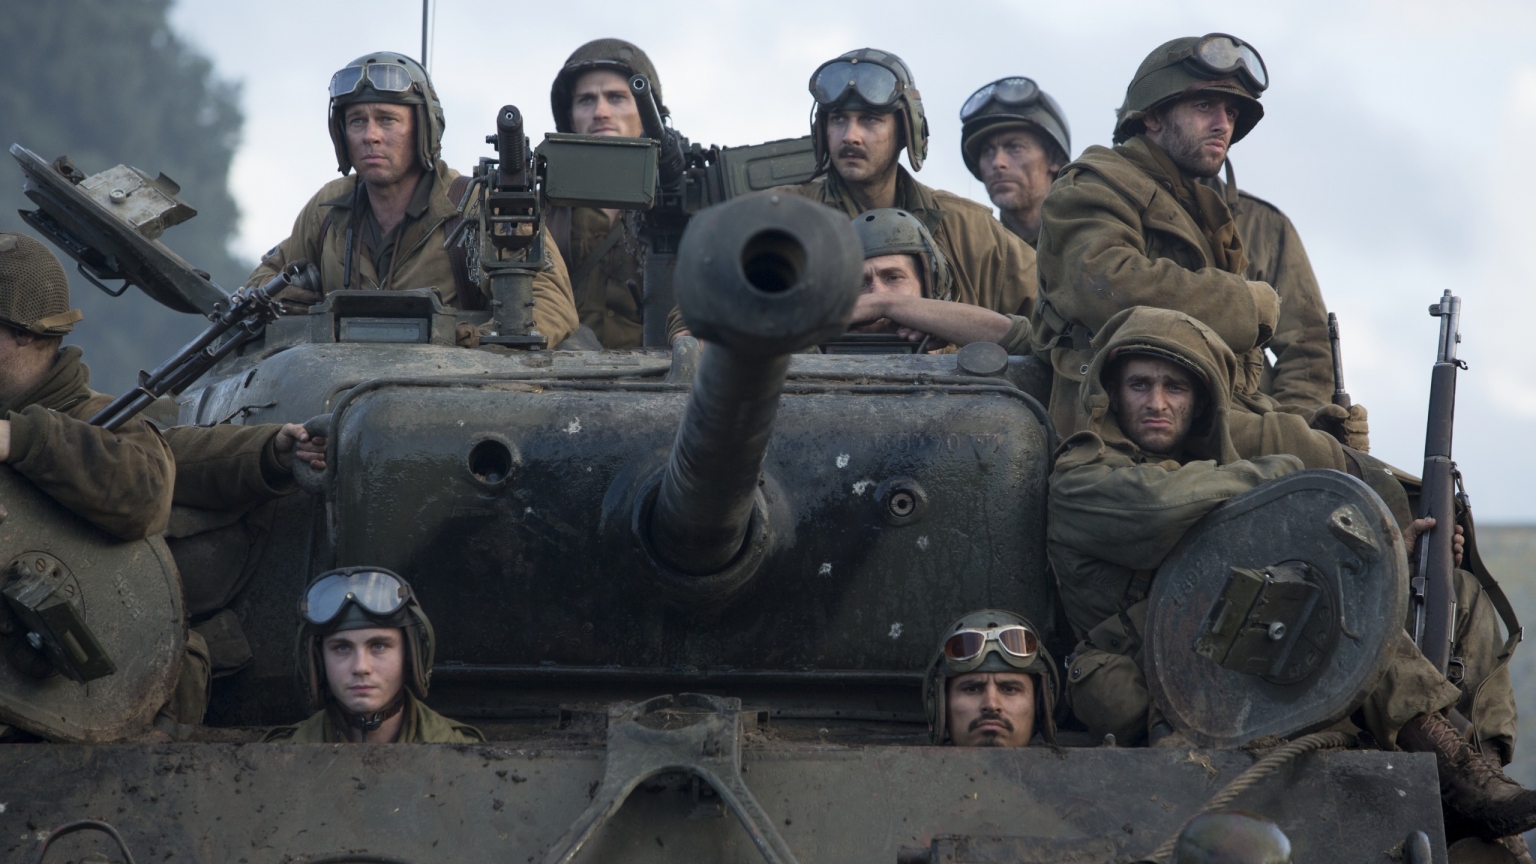 Fury Movie 2014 for 1536 x 864 HDTV resolution